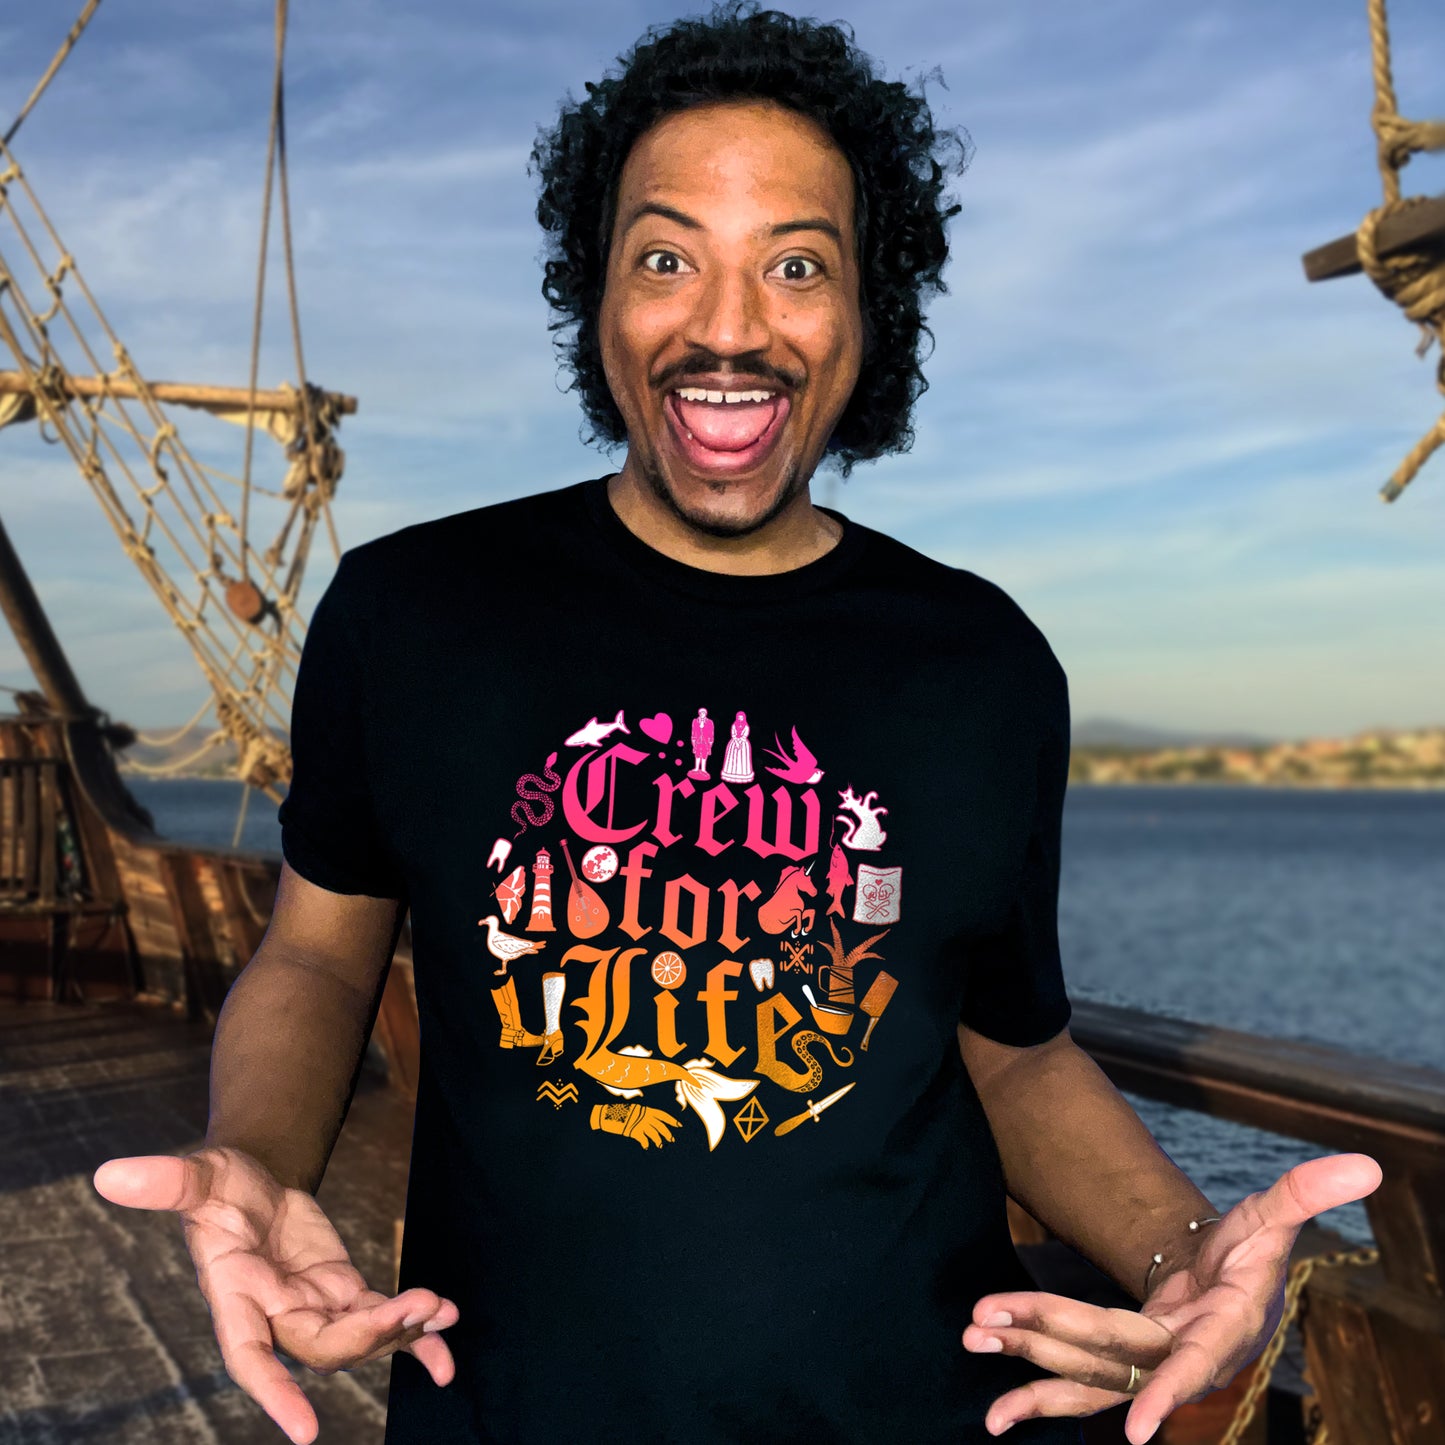 An image of actor Samba Schutte in a black T-shirt. On the front of the shirt is pink and orange old fashioned text that says "Crew for life." Around the text are drawings of flowers, gloves, and chef tools. Behind Samba is a pirate ship on the open water, with land in the distance.